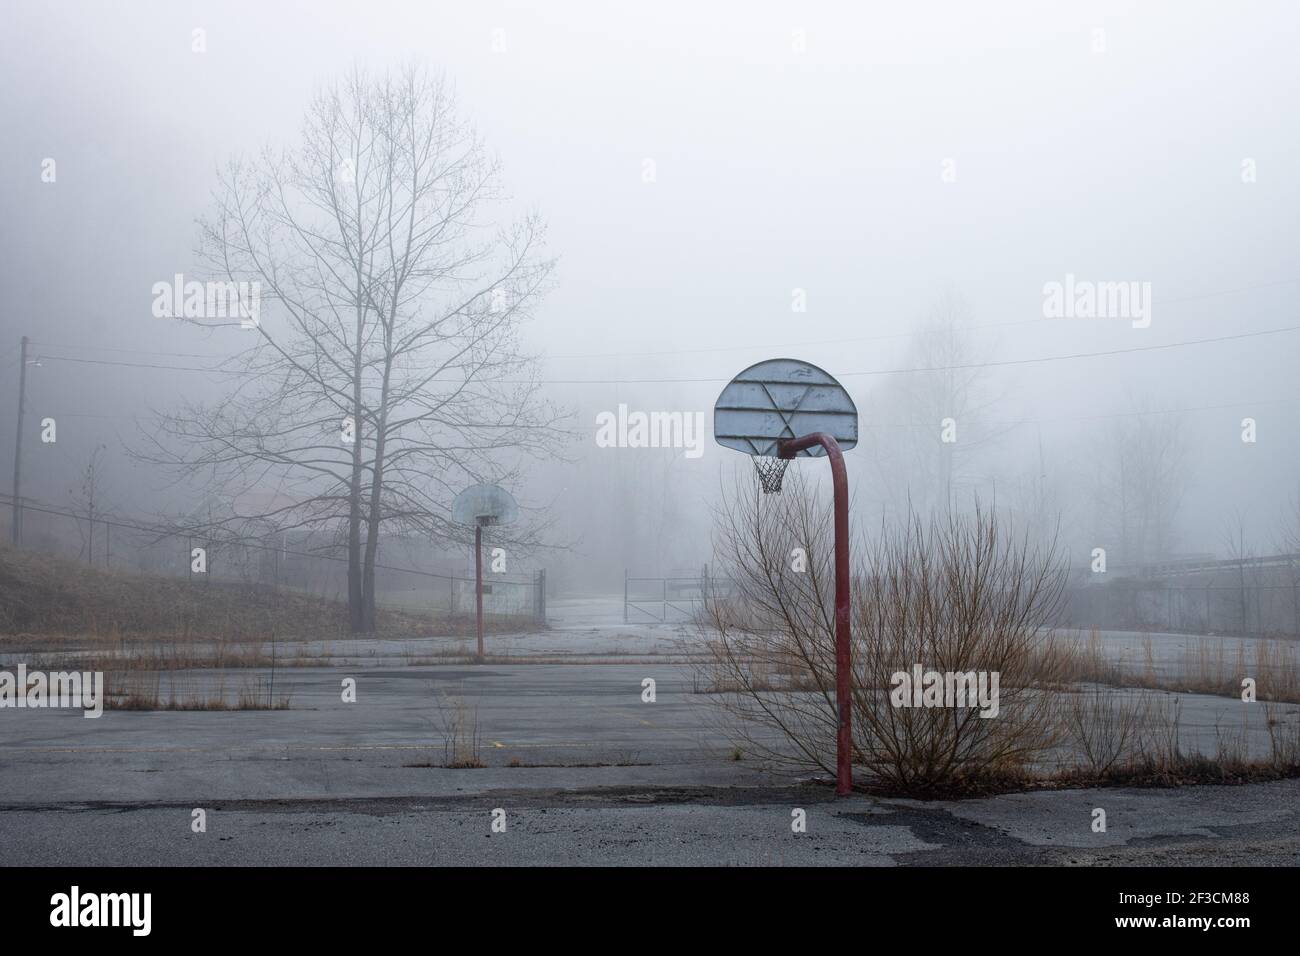 Abandoned basketball goals stand in thick morning fog. Stock Photo